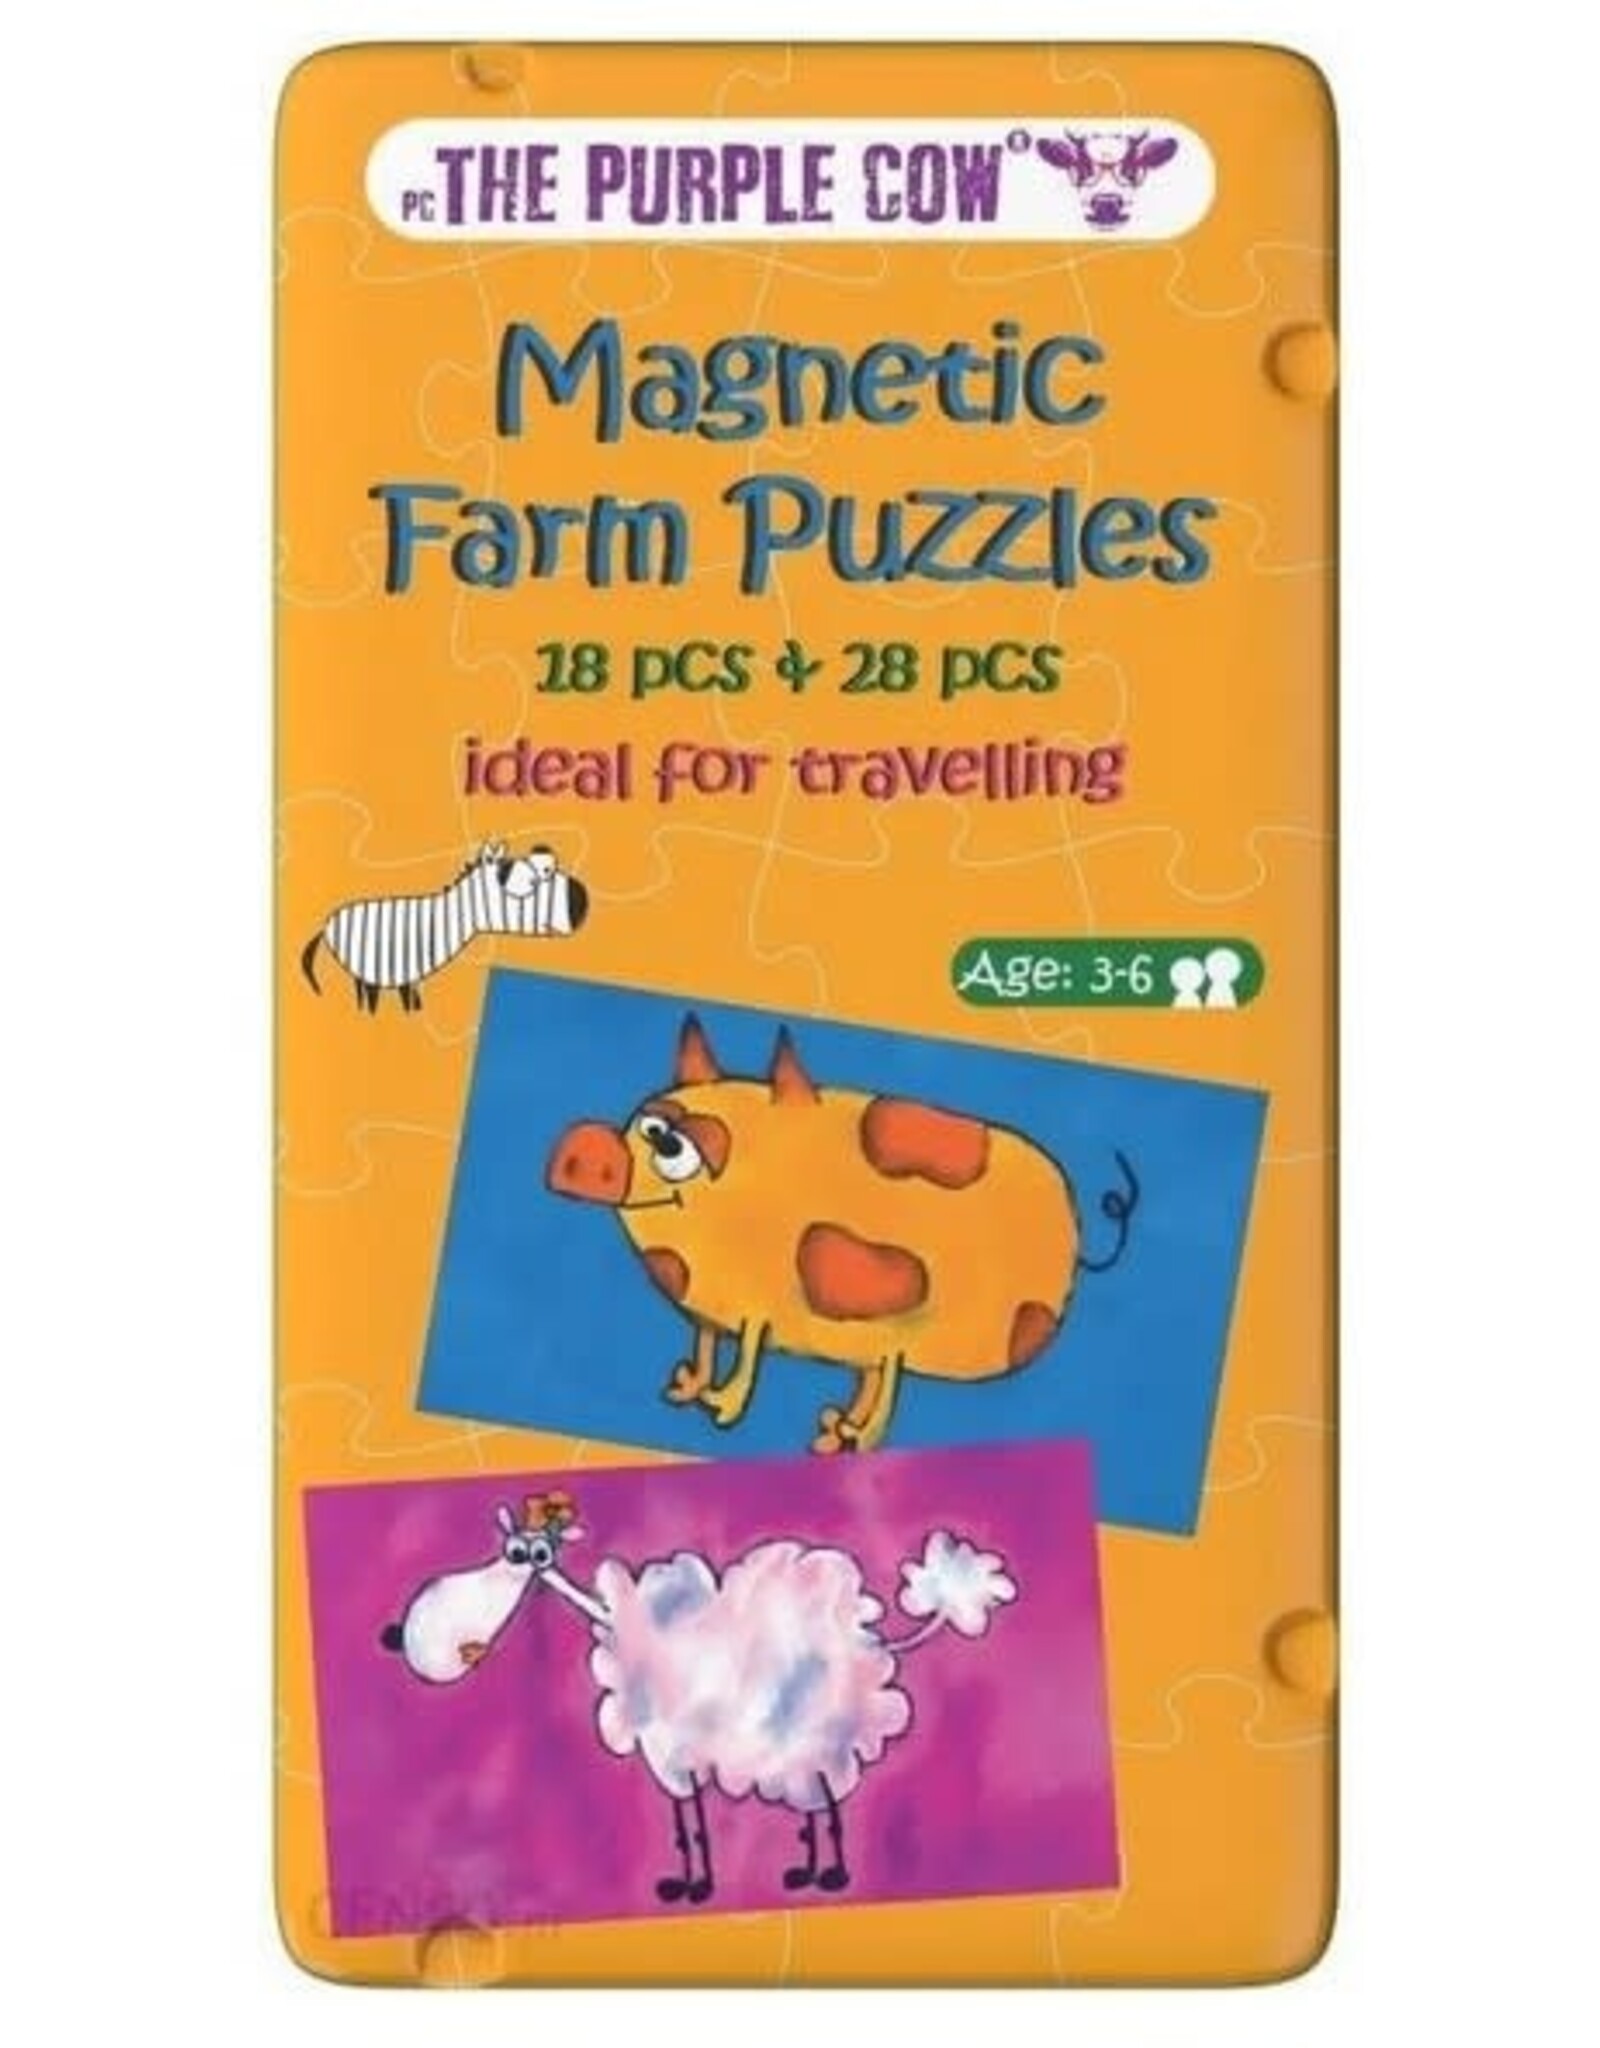 The Purple Cow Magnetic Farm Puzzles Travel Game